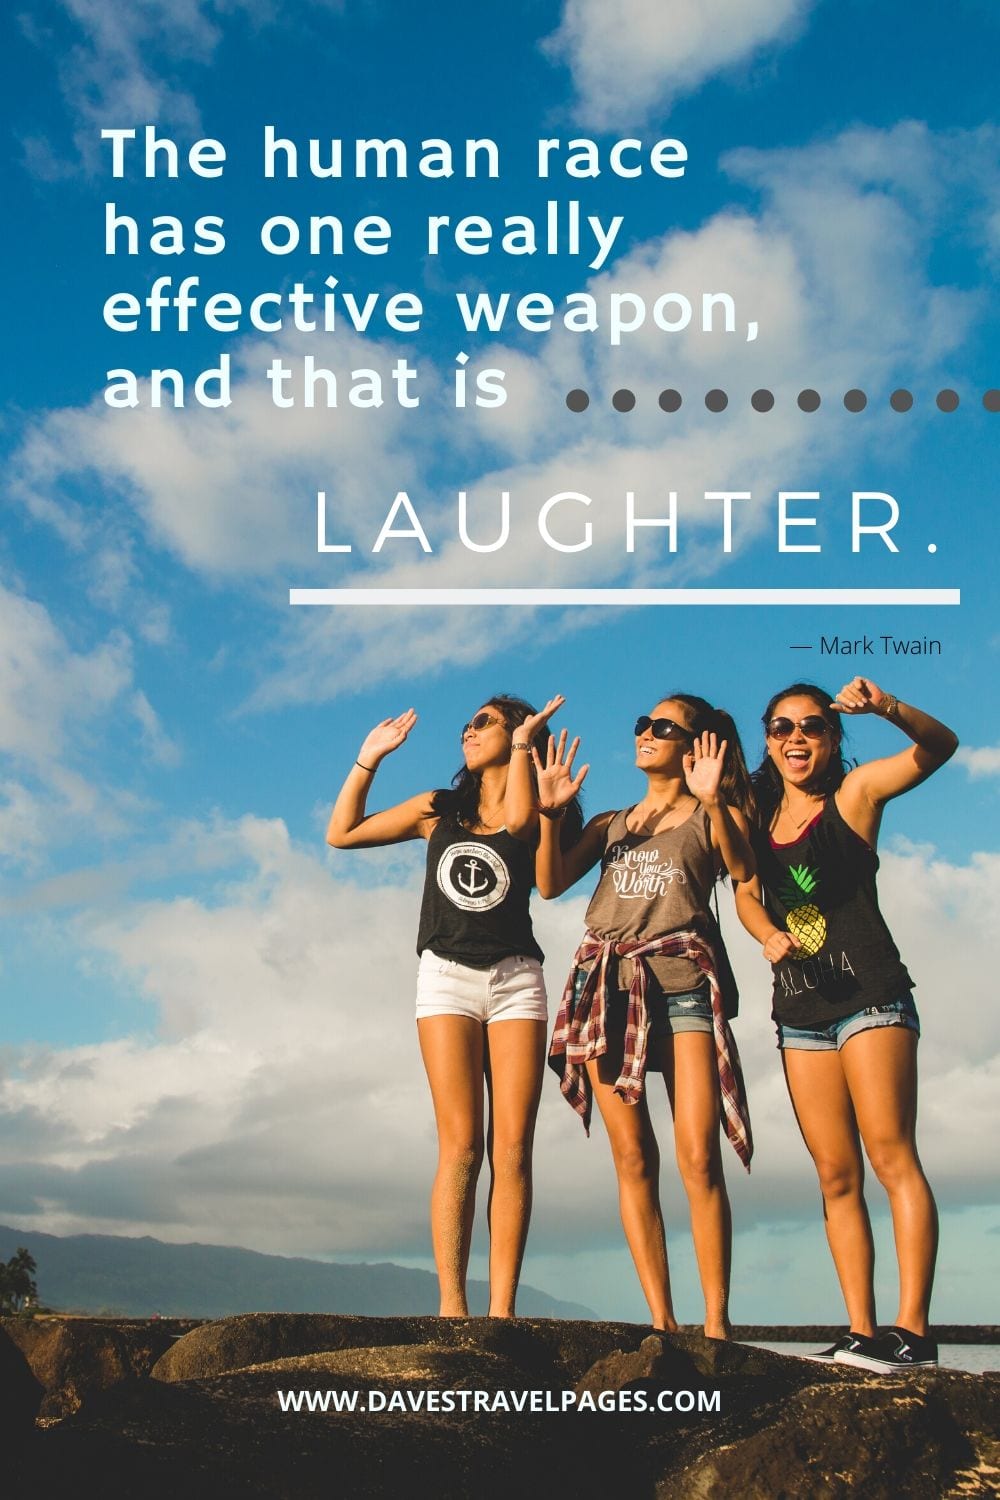 The human race has one really effective weapon, and that is laughter: Mark Twain